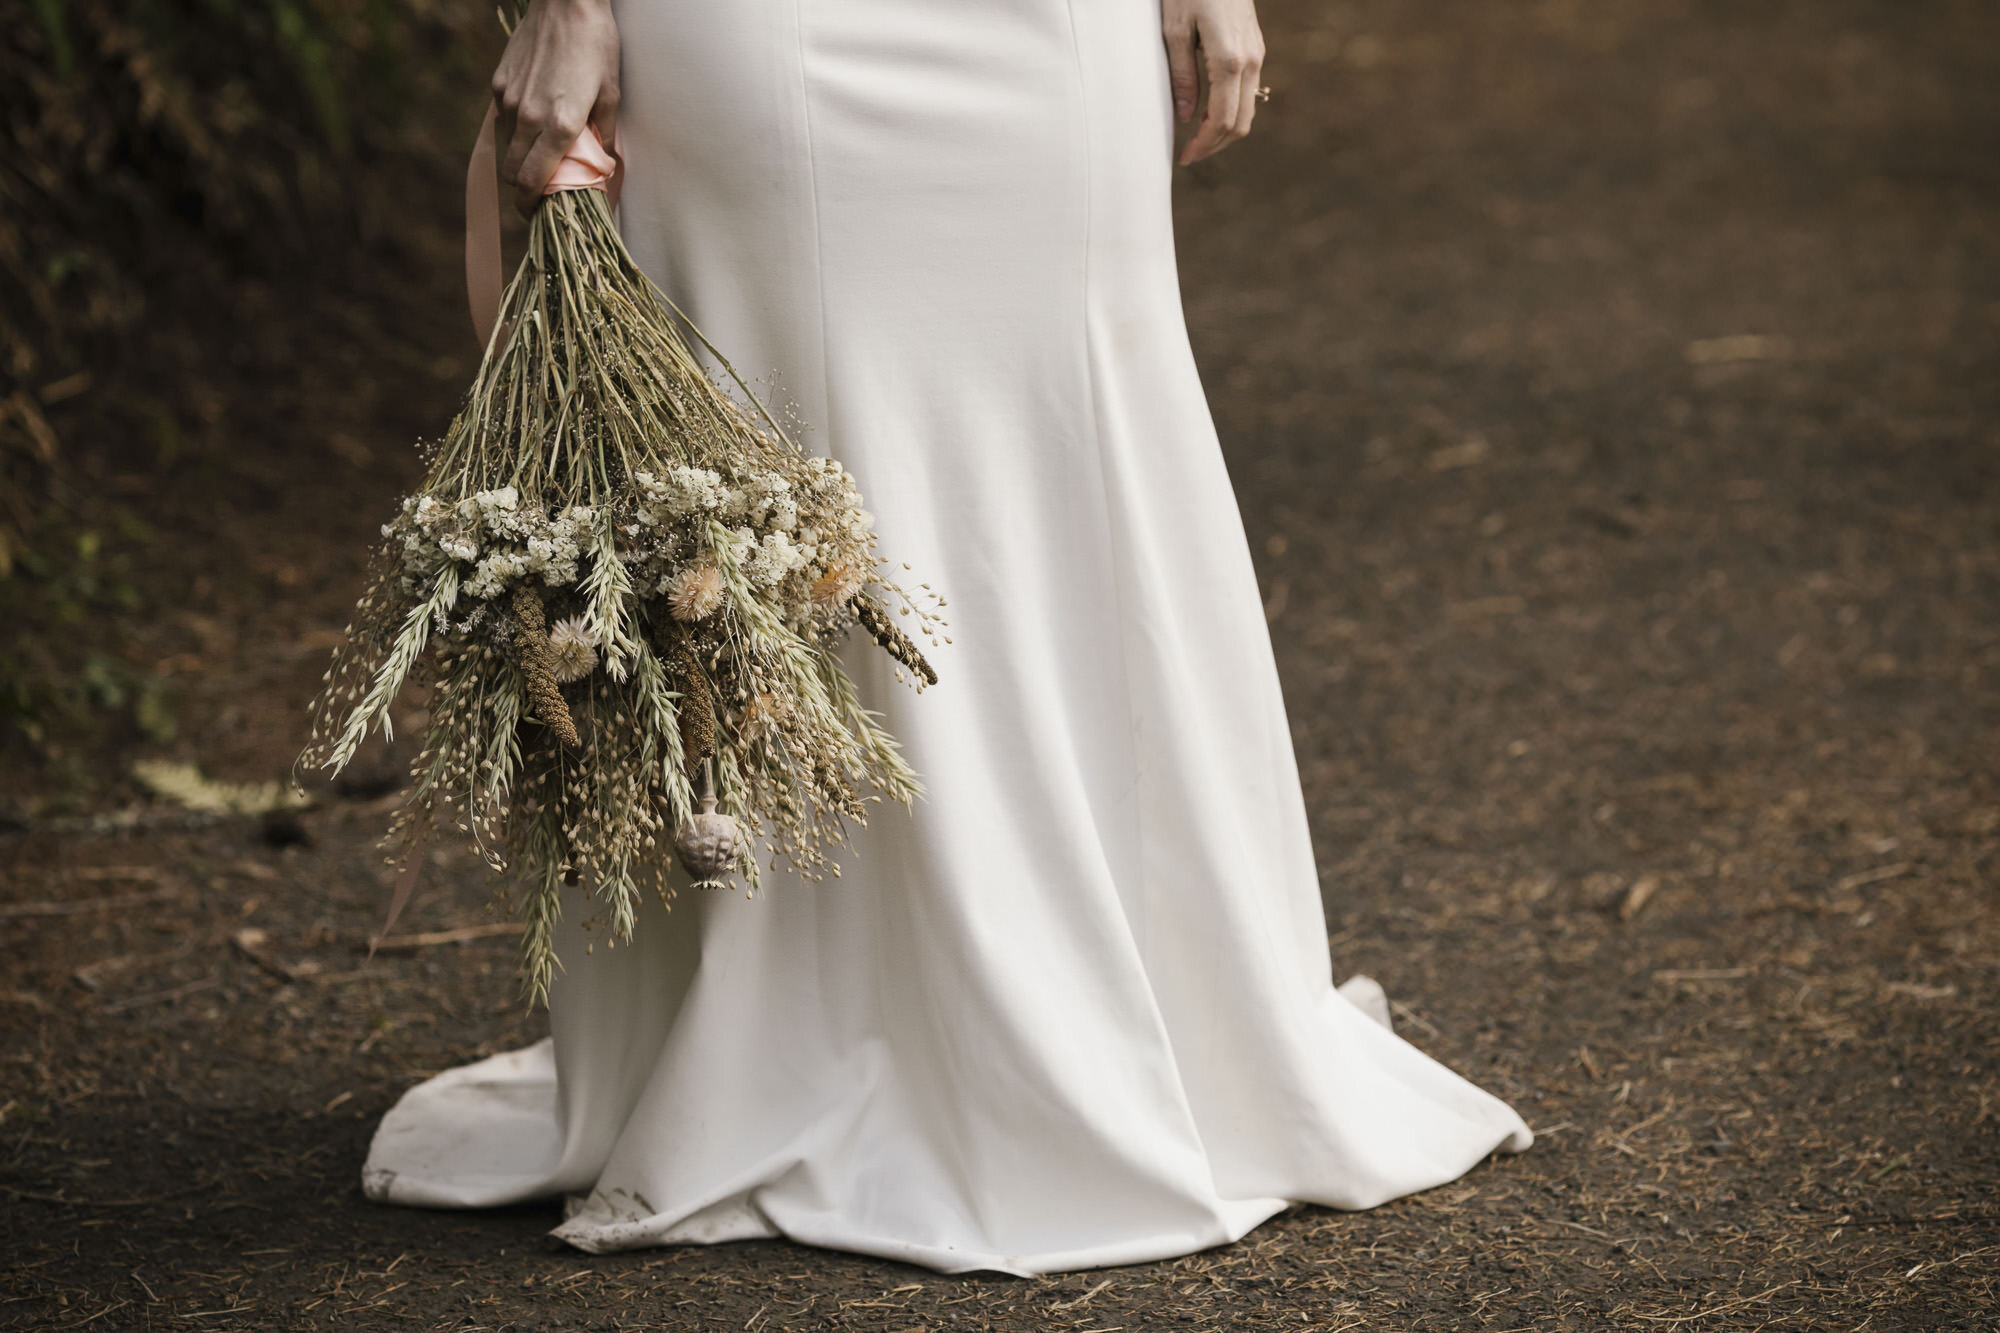 Wedding bouquet made of dried flowers with bottom of bride's dress